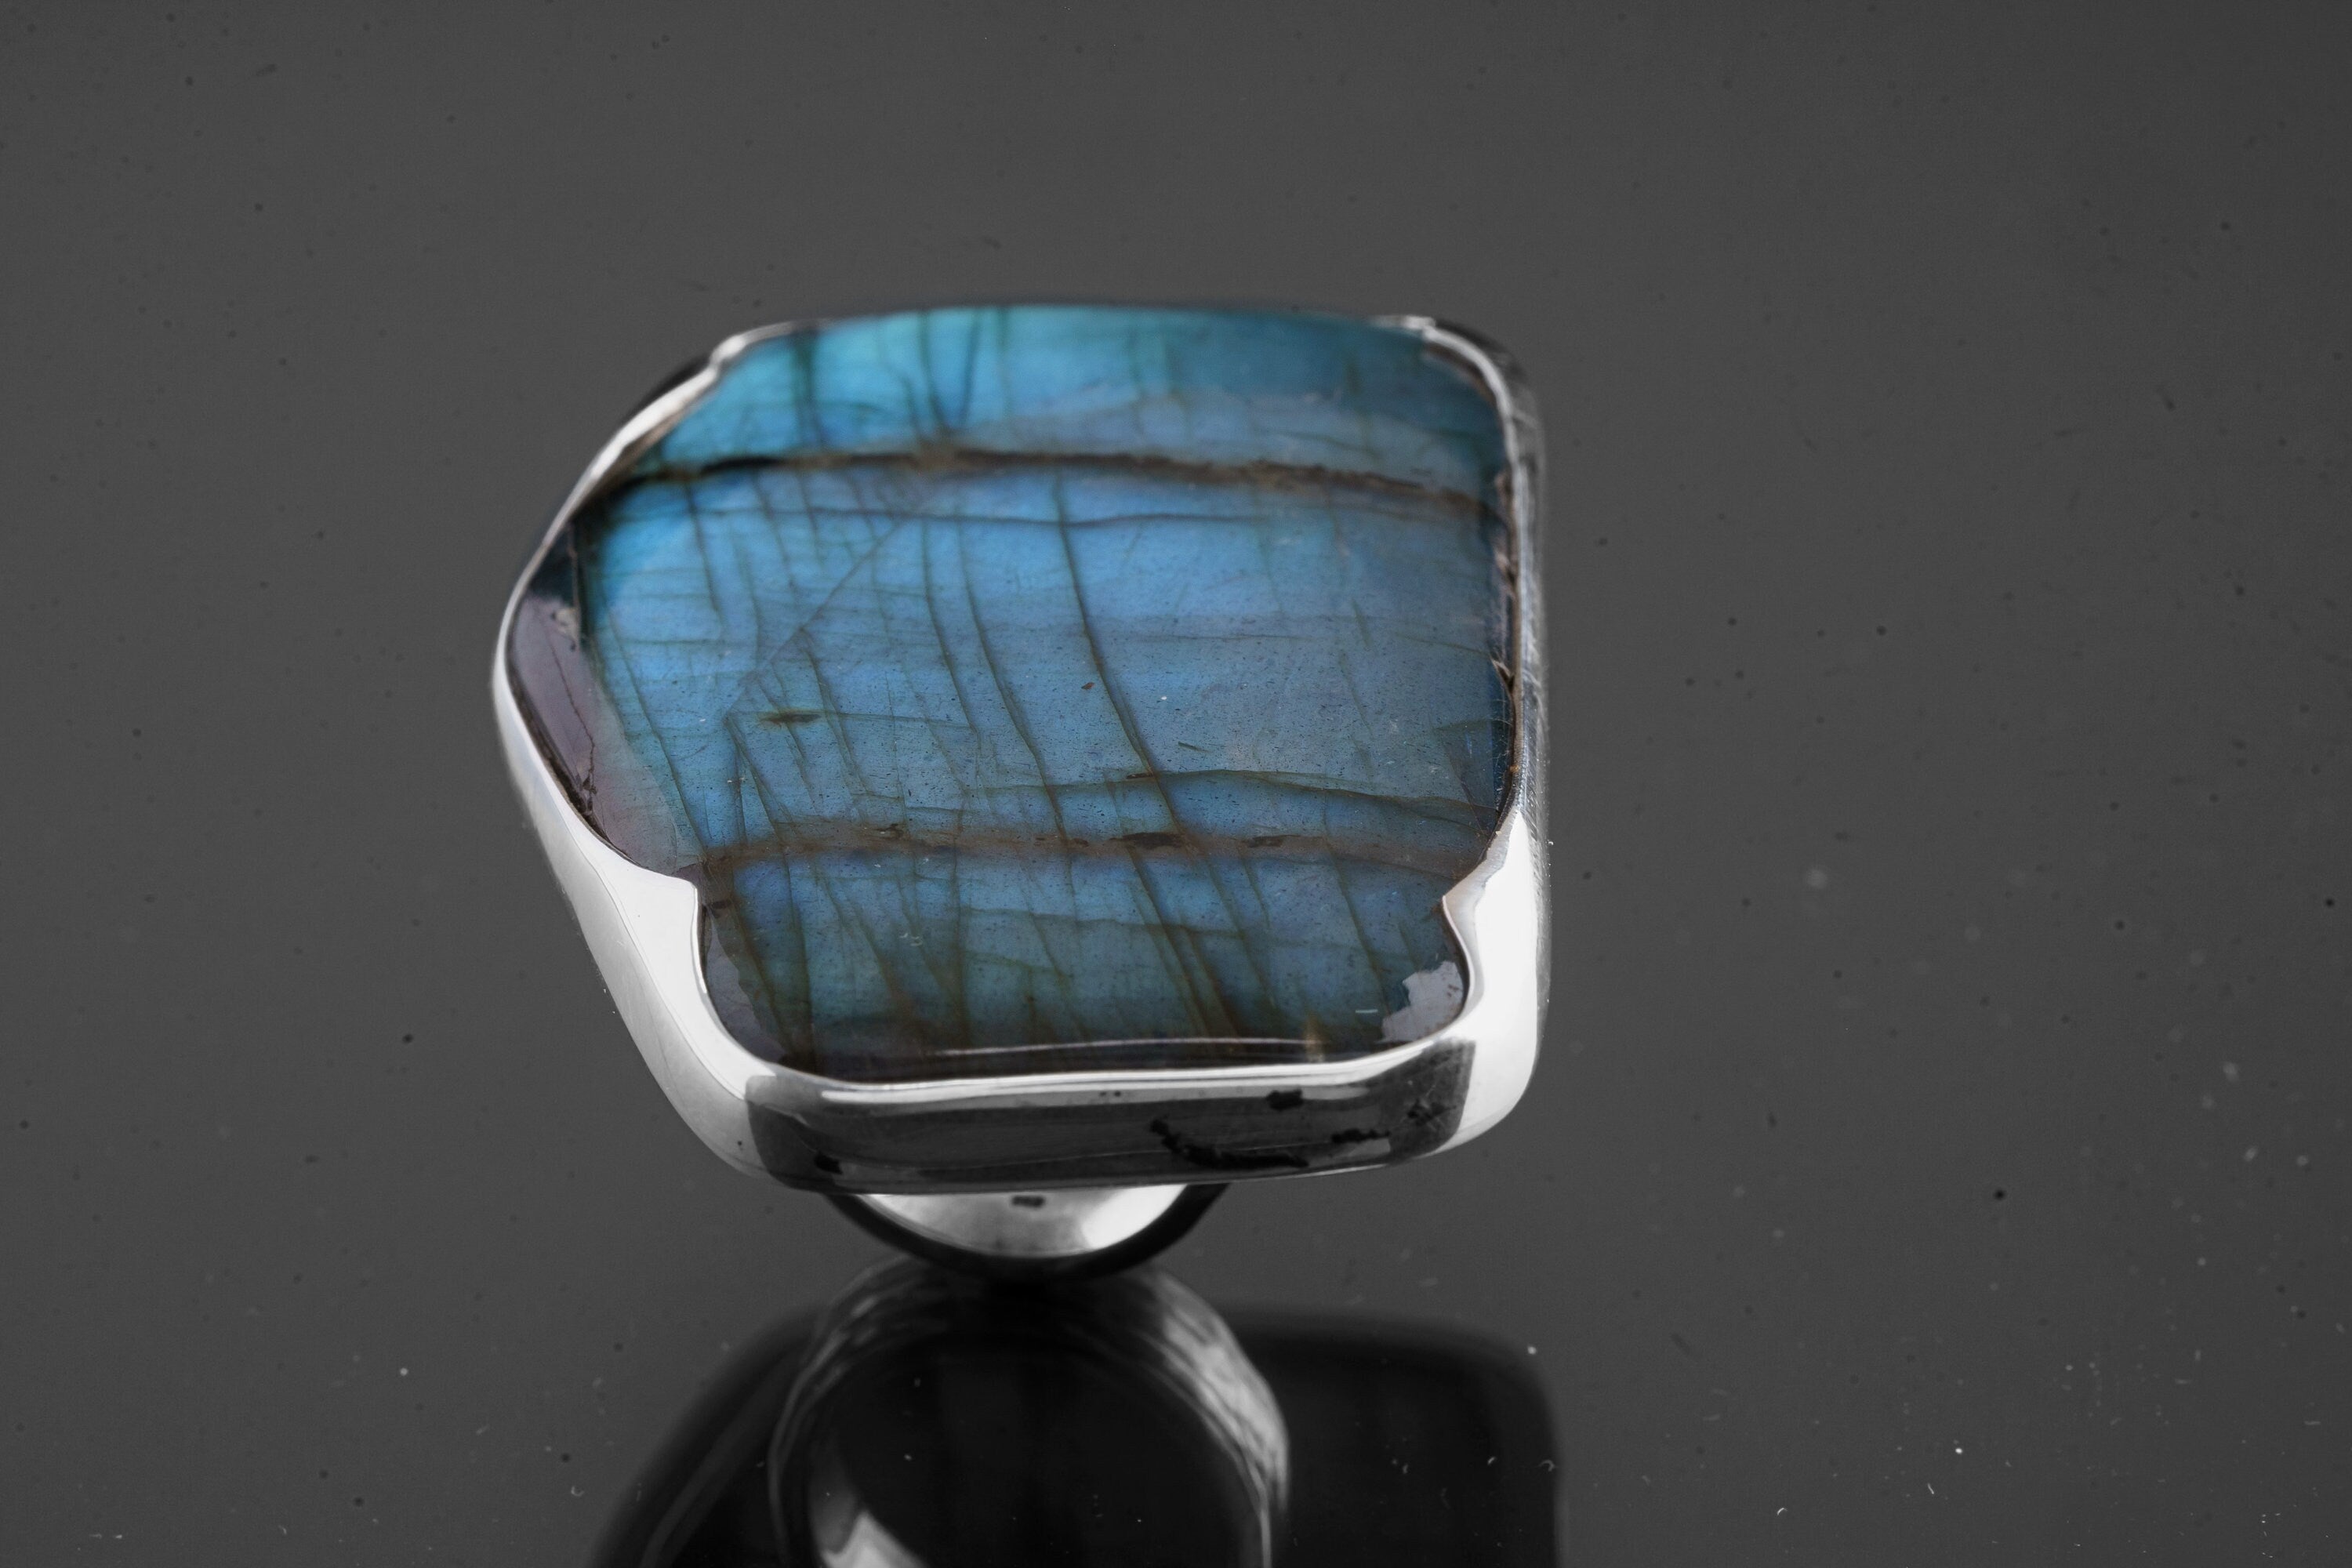 Big AAA Blue Labradorite Freeform Wing Shaped (Has a Twin) - 925 Sterling Silver - Heavy Set Adjustable Textured Ring - Size 5-10 US